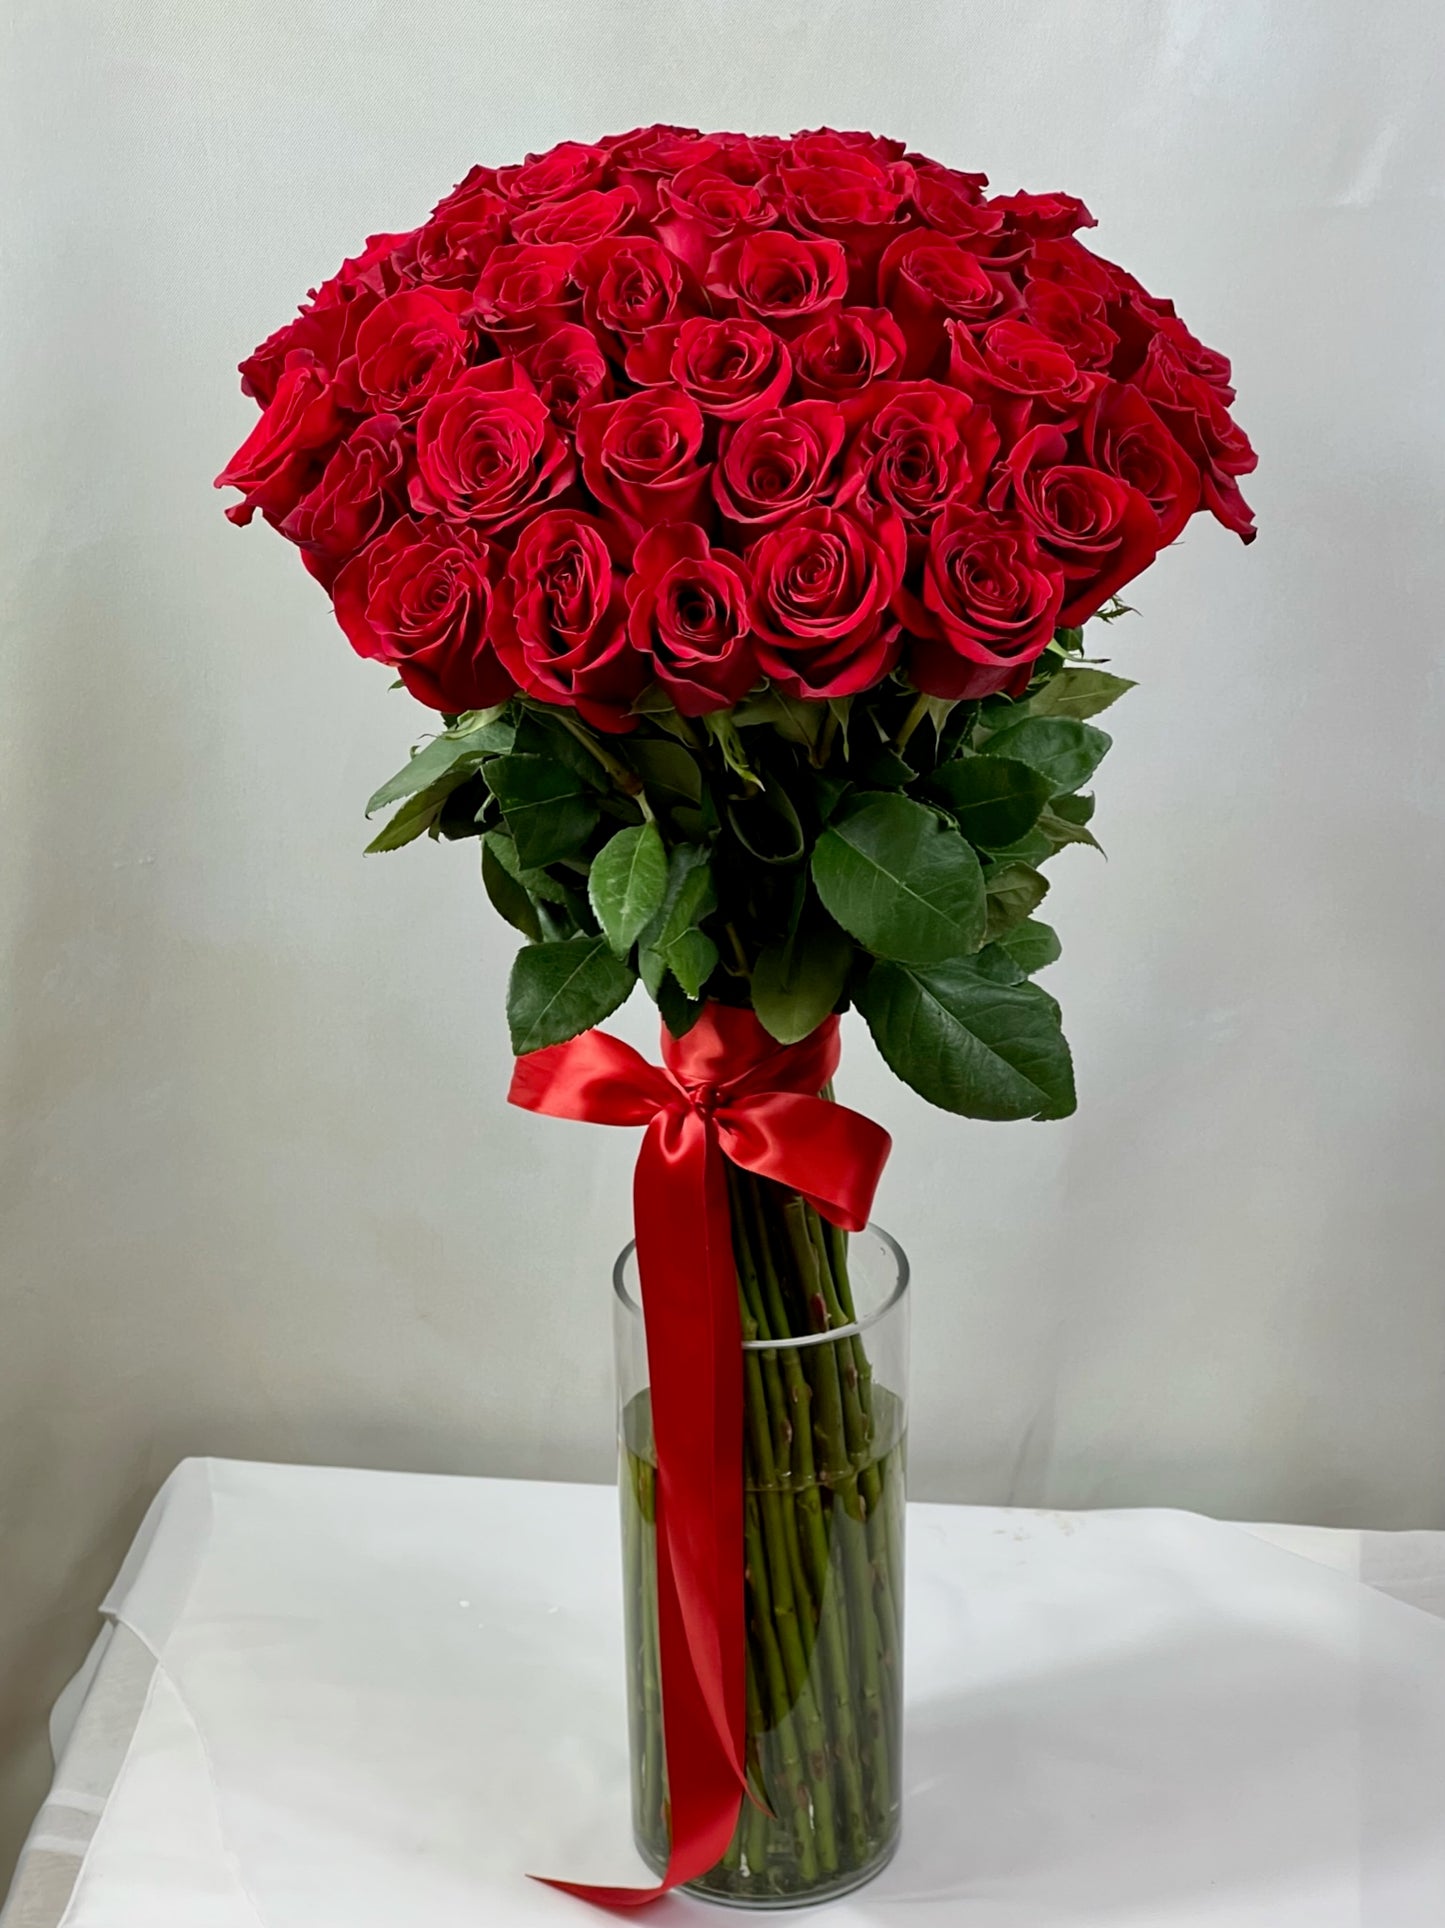 Grand Roses Bouquet